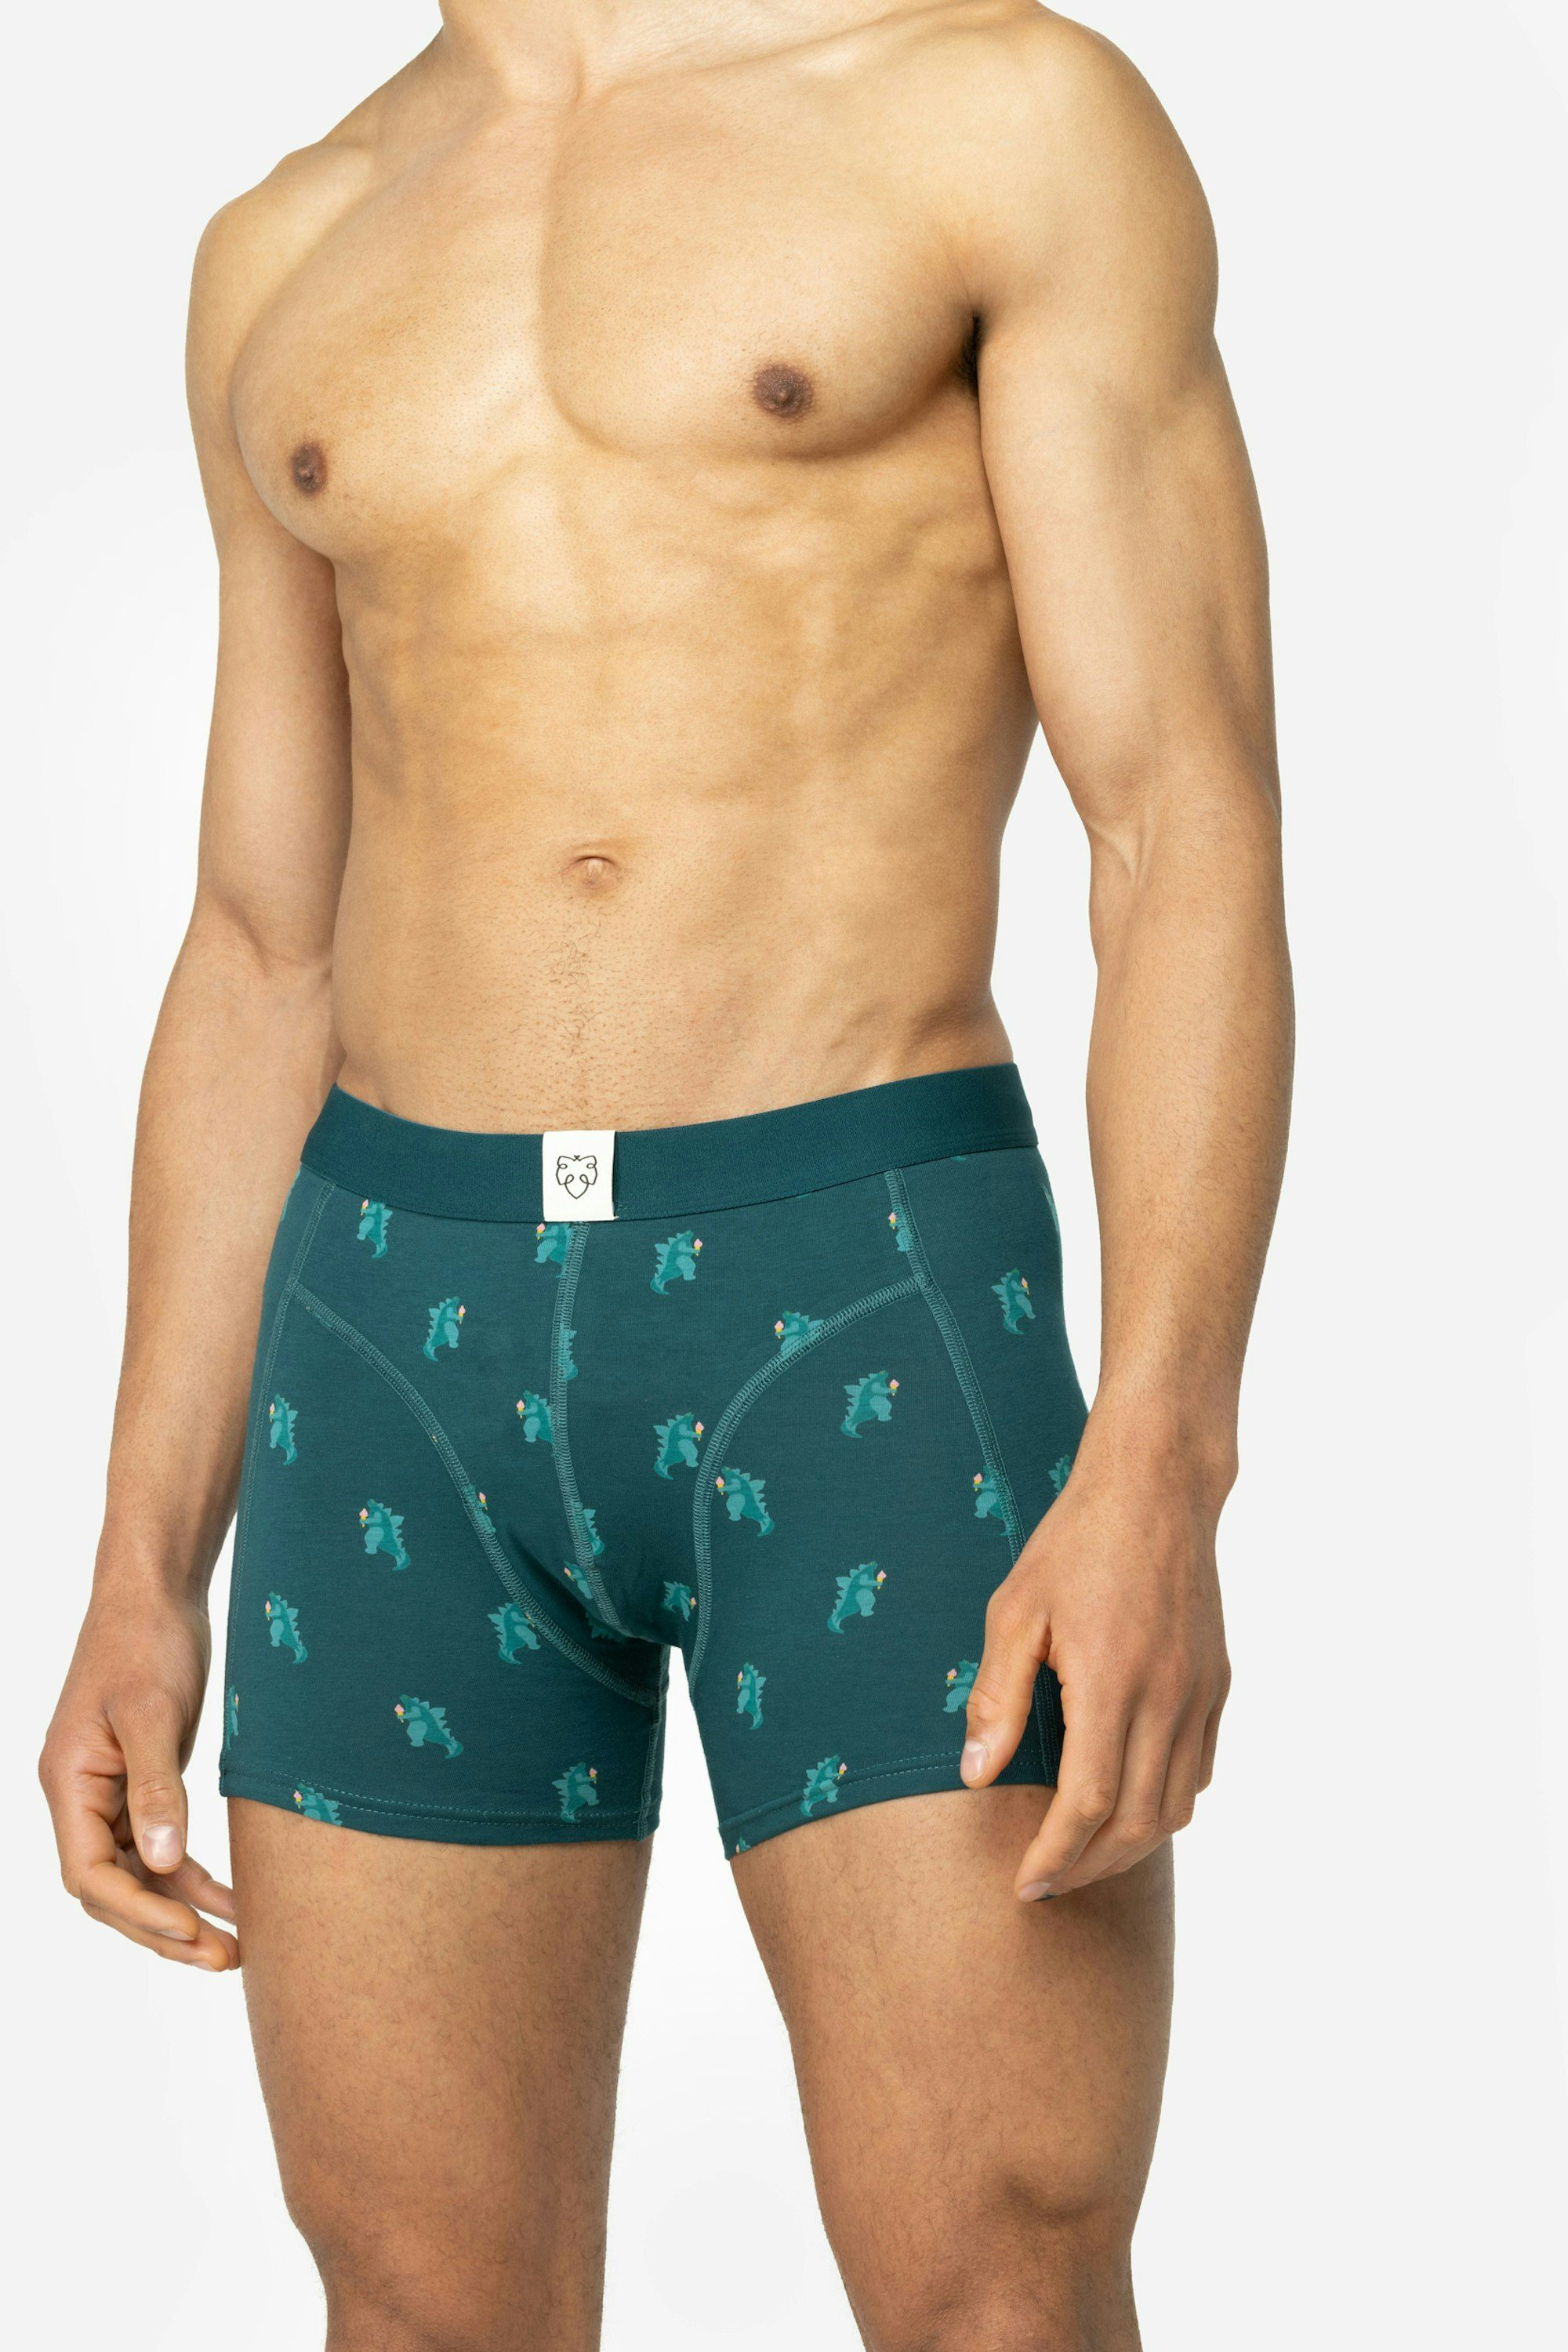 A-dam green boxers briefs with Godzilla from GOTS organic cotton